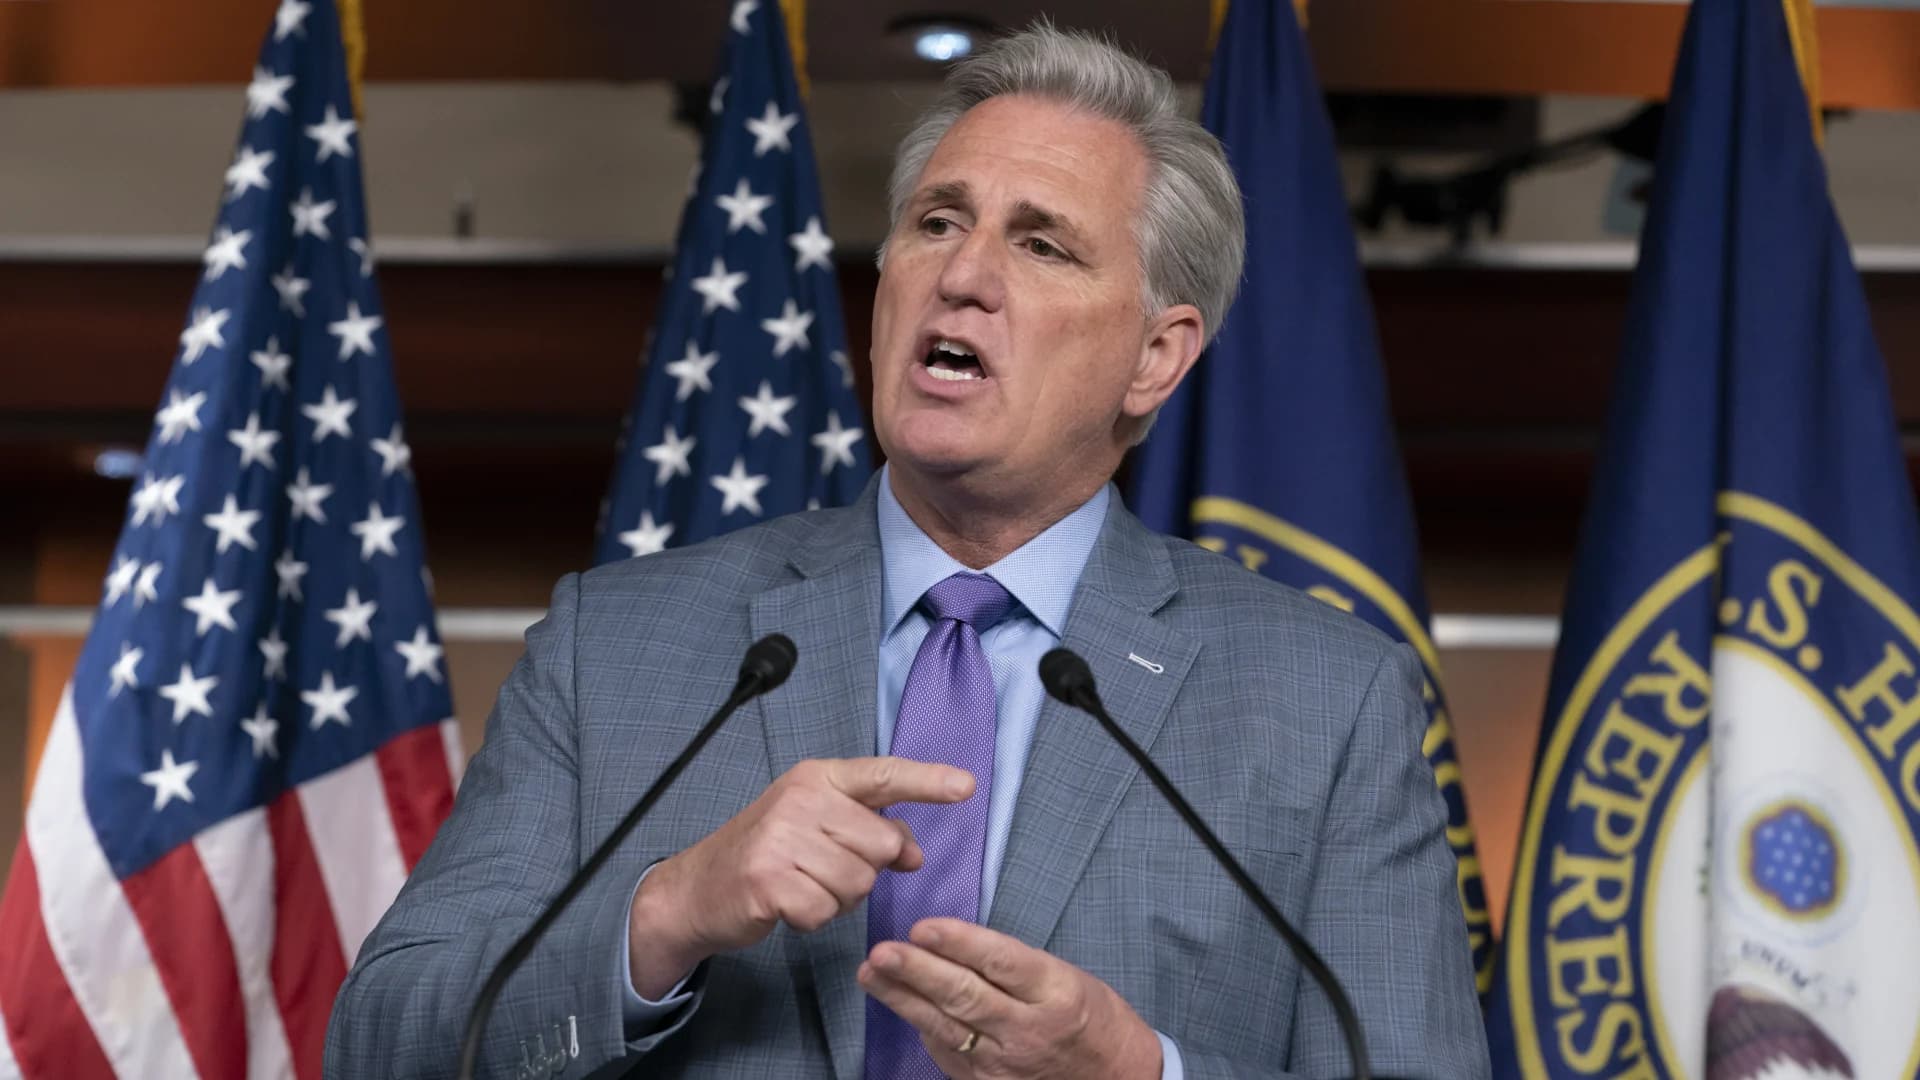 NY Times report: McCarthy said he would urge Trump to resign